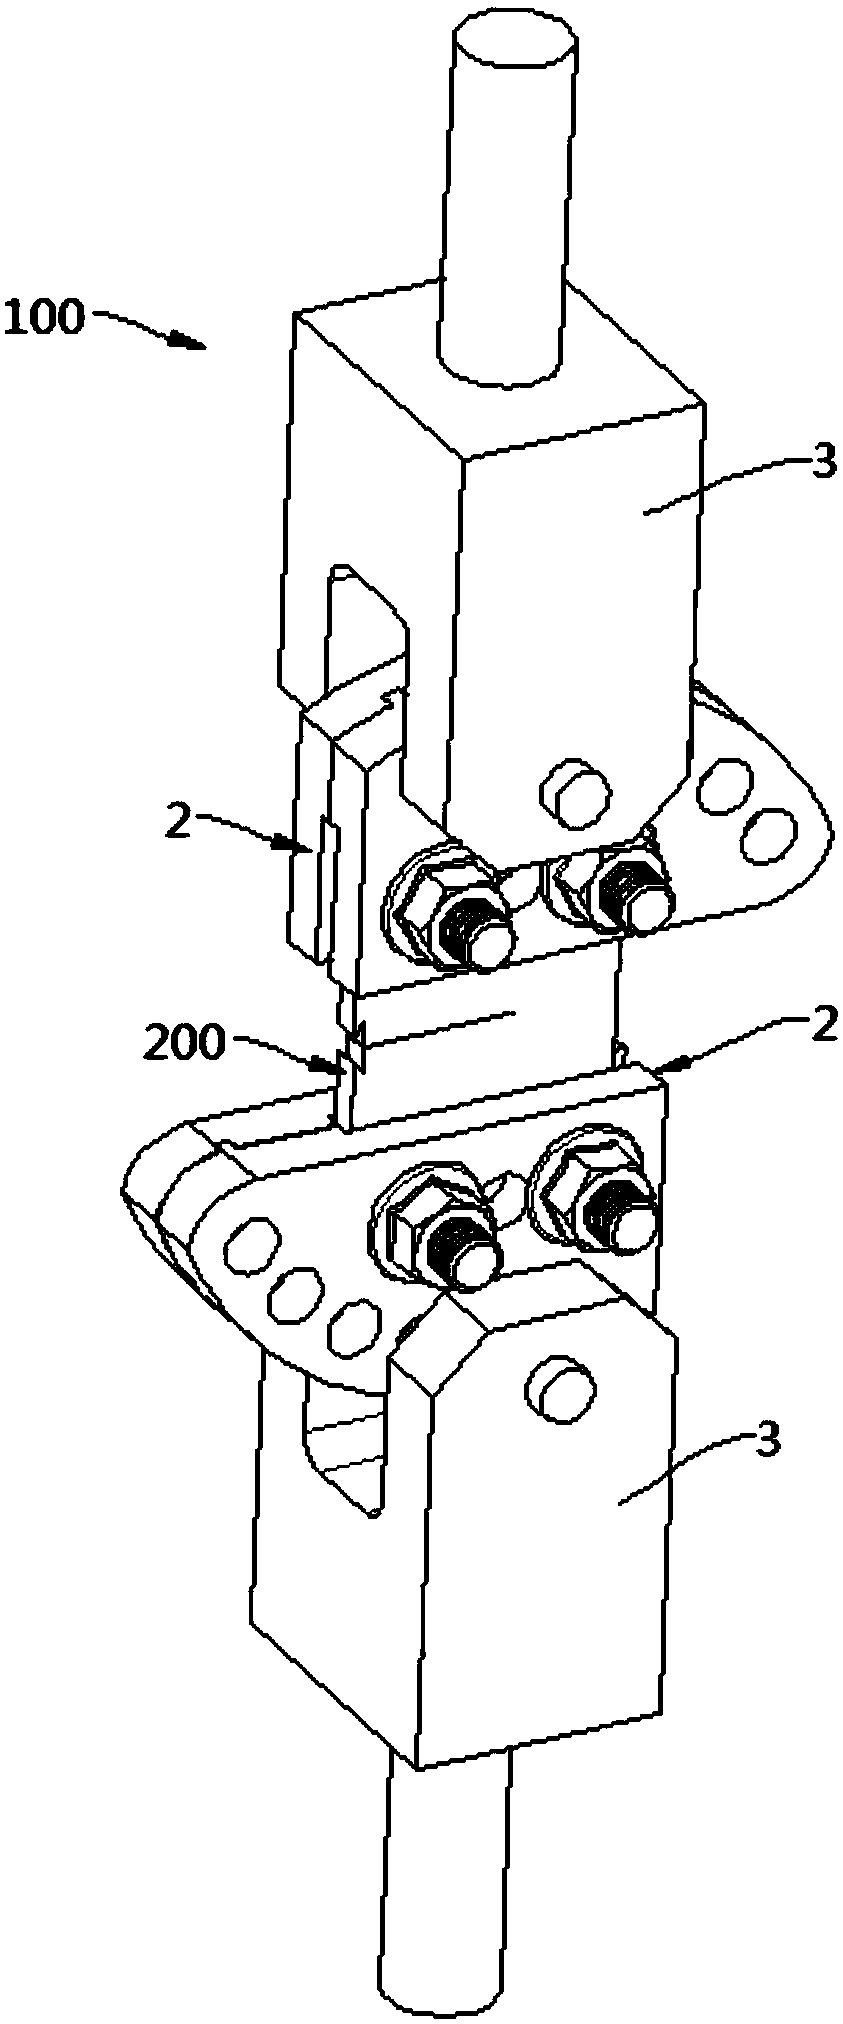 Test device and test method for I-II composite crack fatigue propagation rate